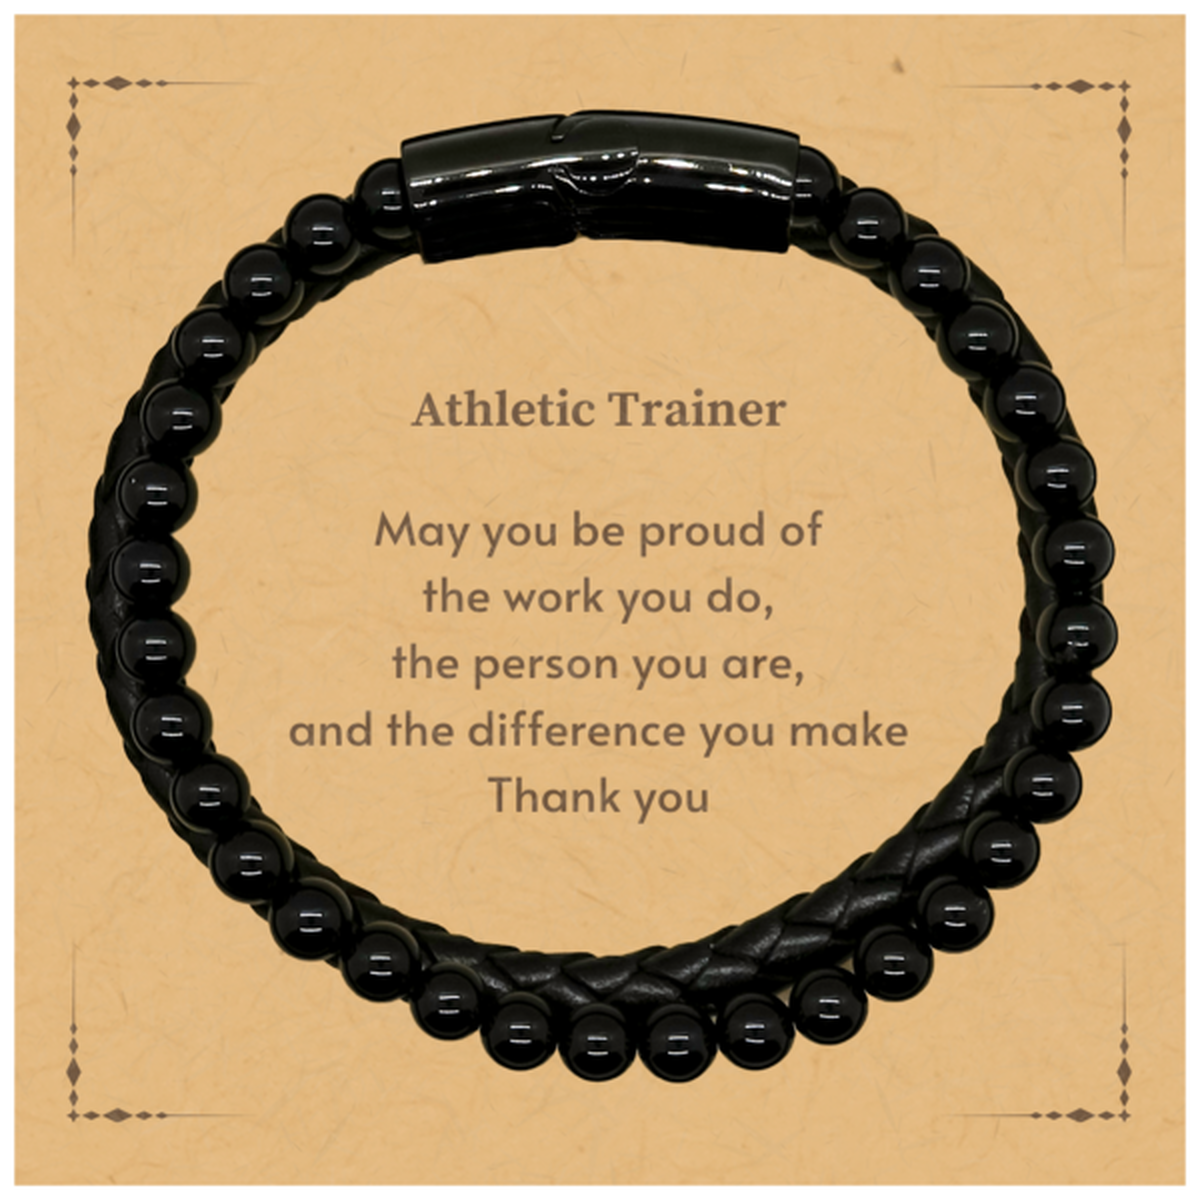 Heartwarming Stone Leather Bracelets Retirement Coworkers Gifts for Athletic Trainer, Athletic Trainer May You be proud of the work you do, the person you are Gifts for Boss Men Women Friends